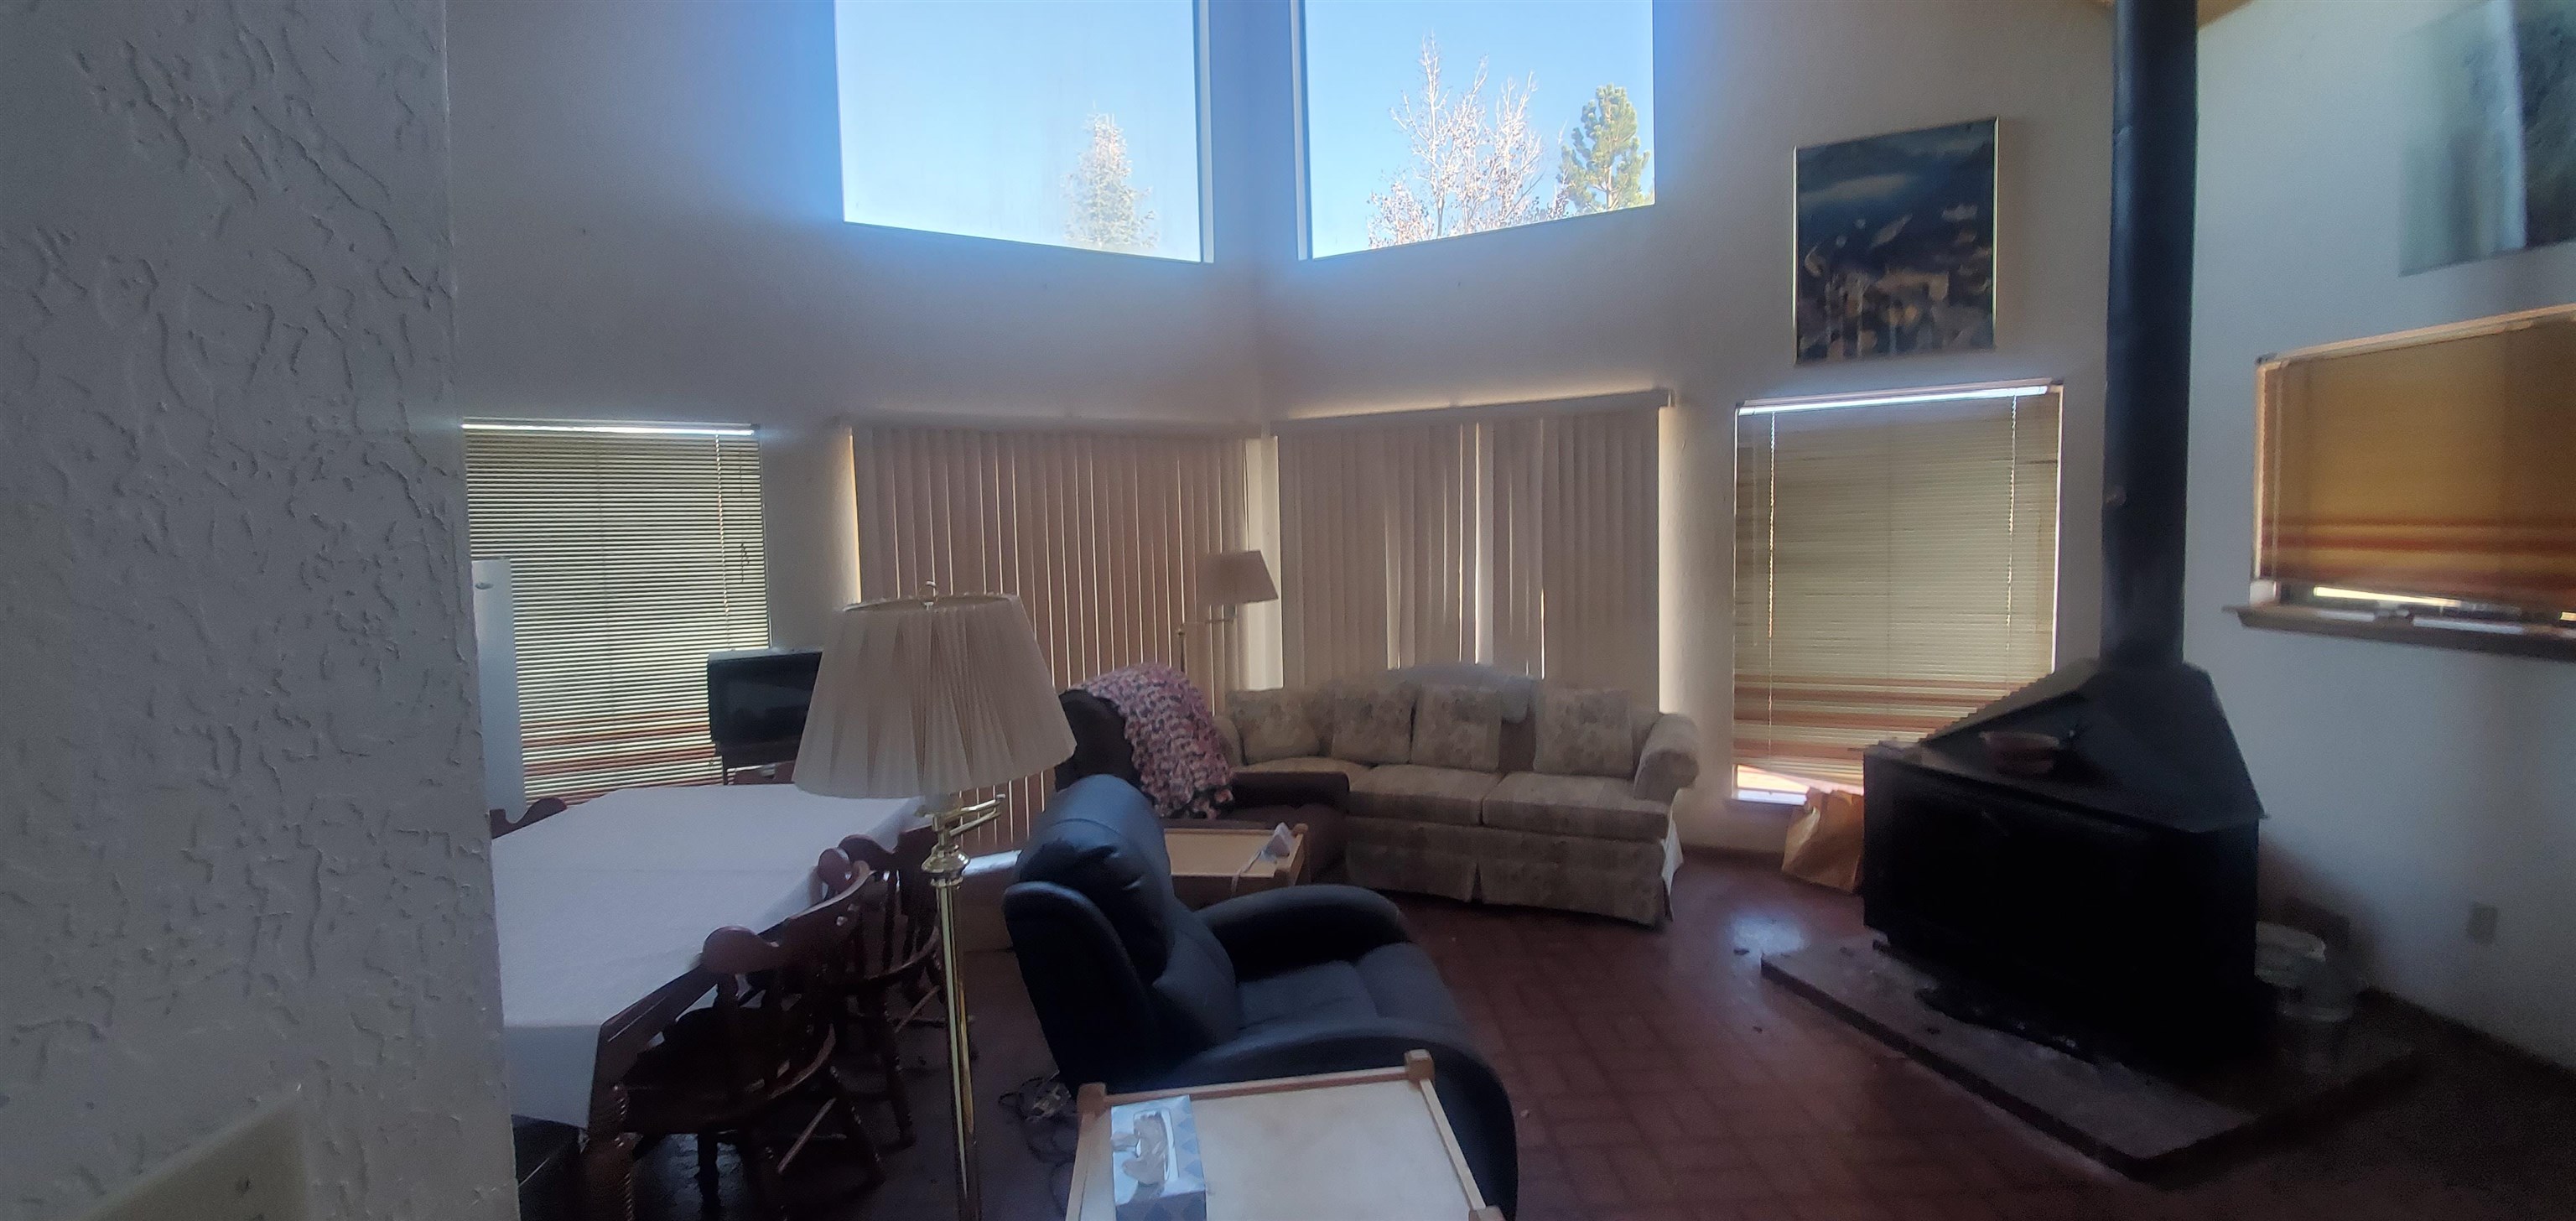 11 Private Drive 17931, Chama, New Mexico 87520, 3 Bedrooms Bedrooms, ,2 BathroomsBathrooms,Residential,For Sale,11 Private Drive 17931,202104854